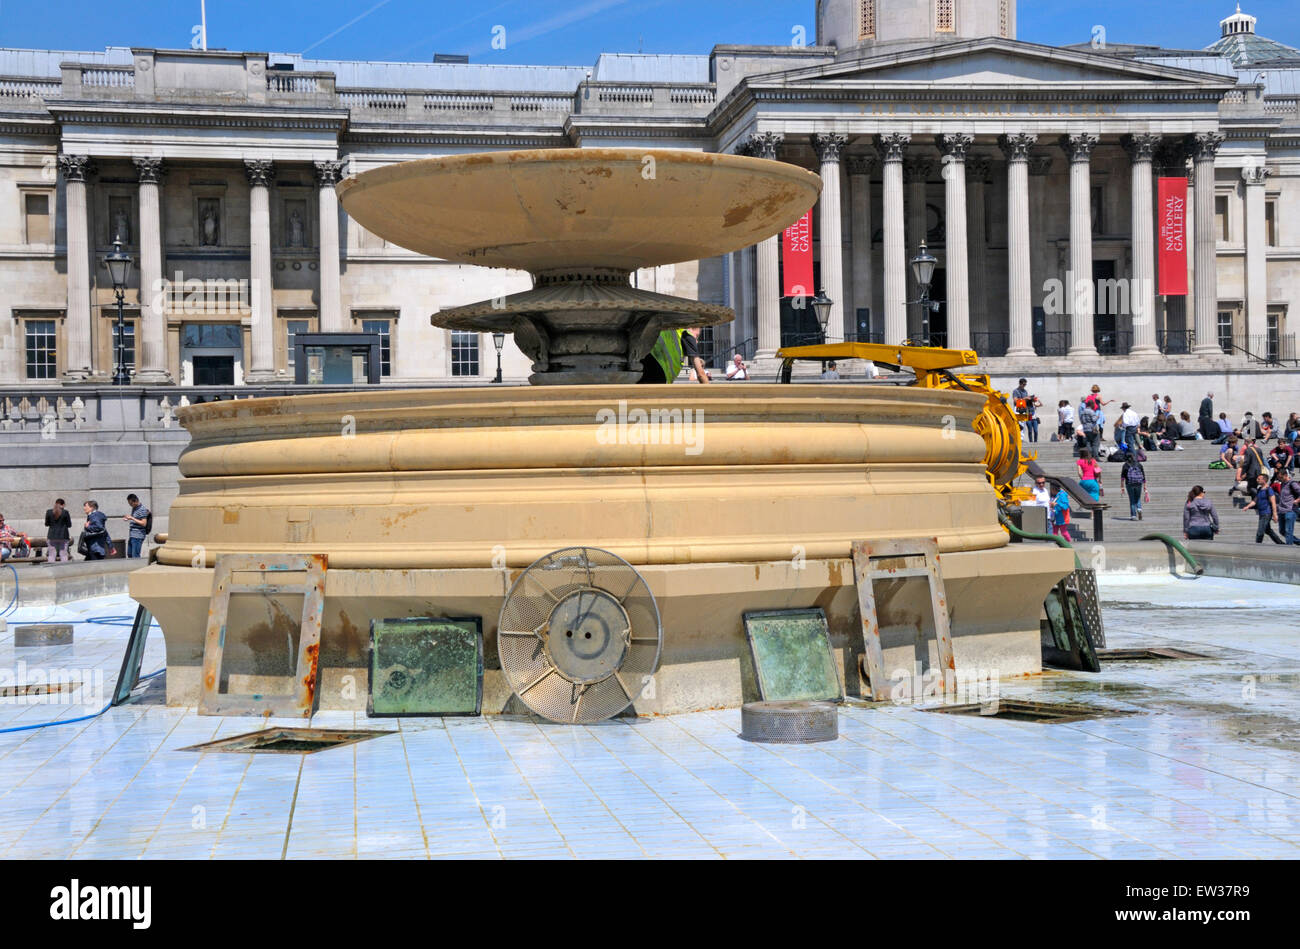 London, England, UK. Trafalgar Square - fountains emptied of the water for cleaning Stock Photo